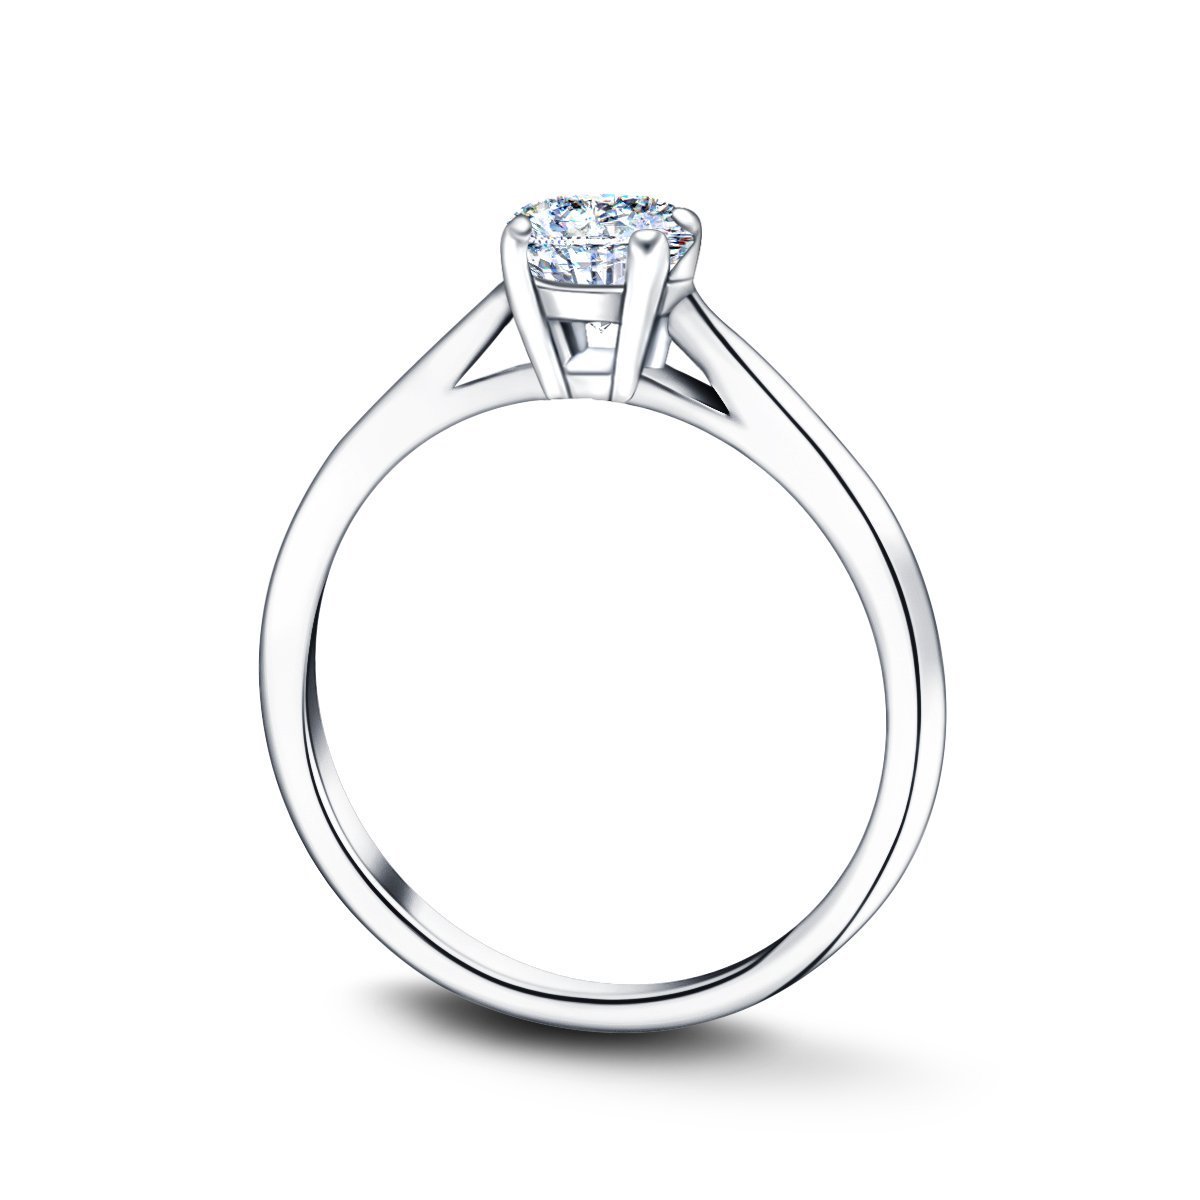 Certified Solitaire Diamond Engagement Ring 0.50ct G/SI Quality 9k White Gold - All Diamond